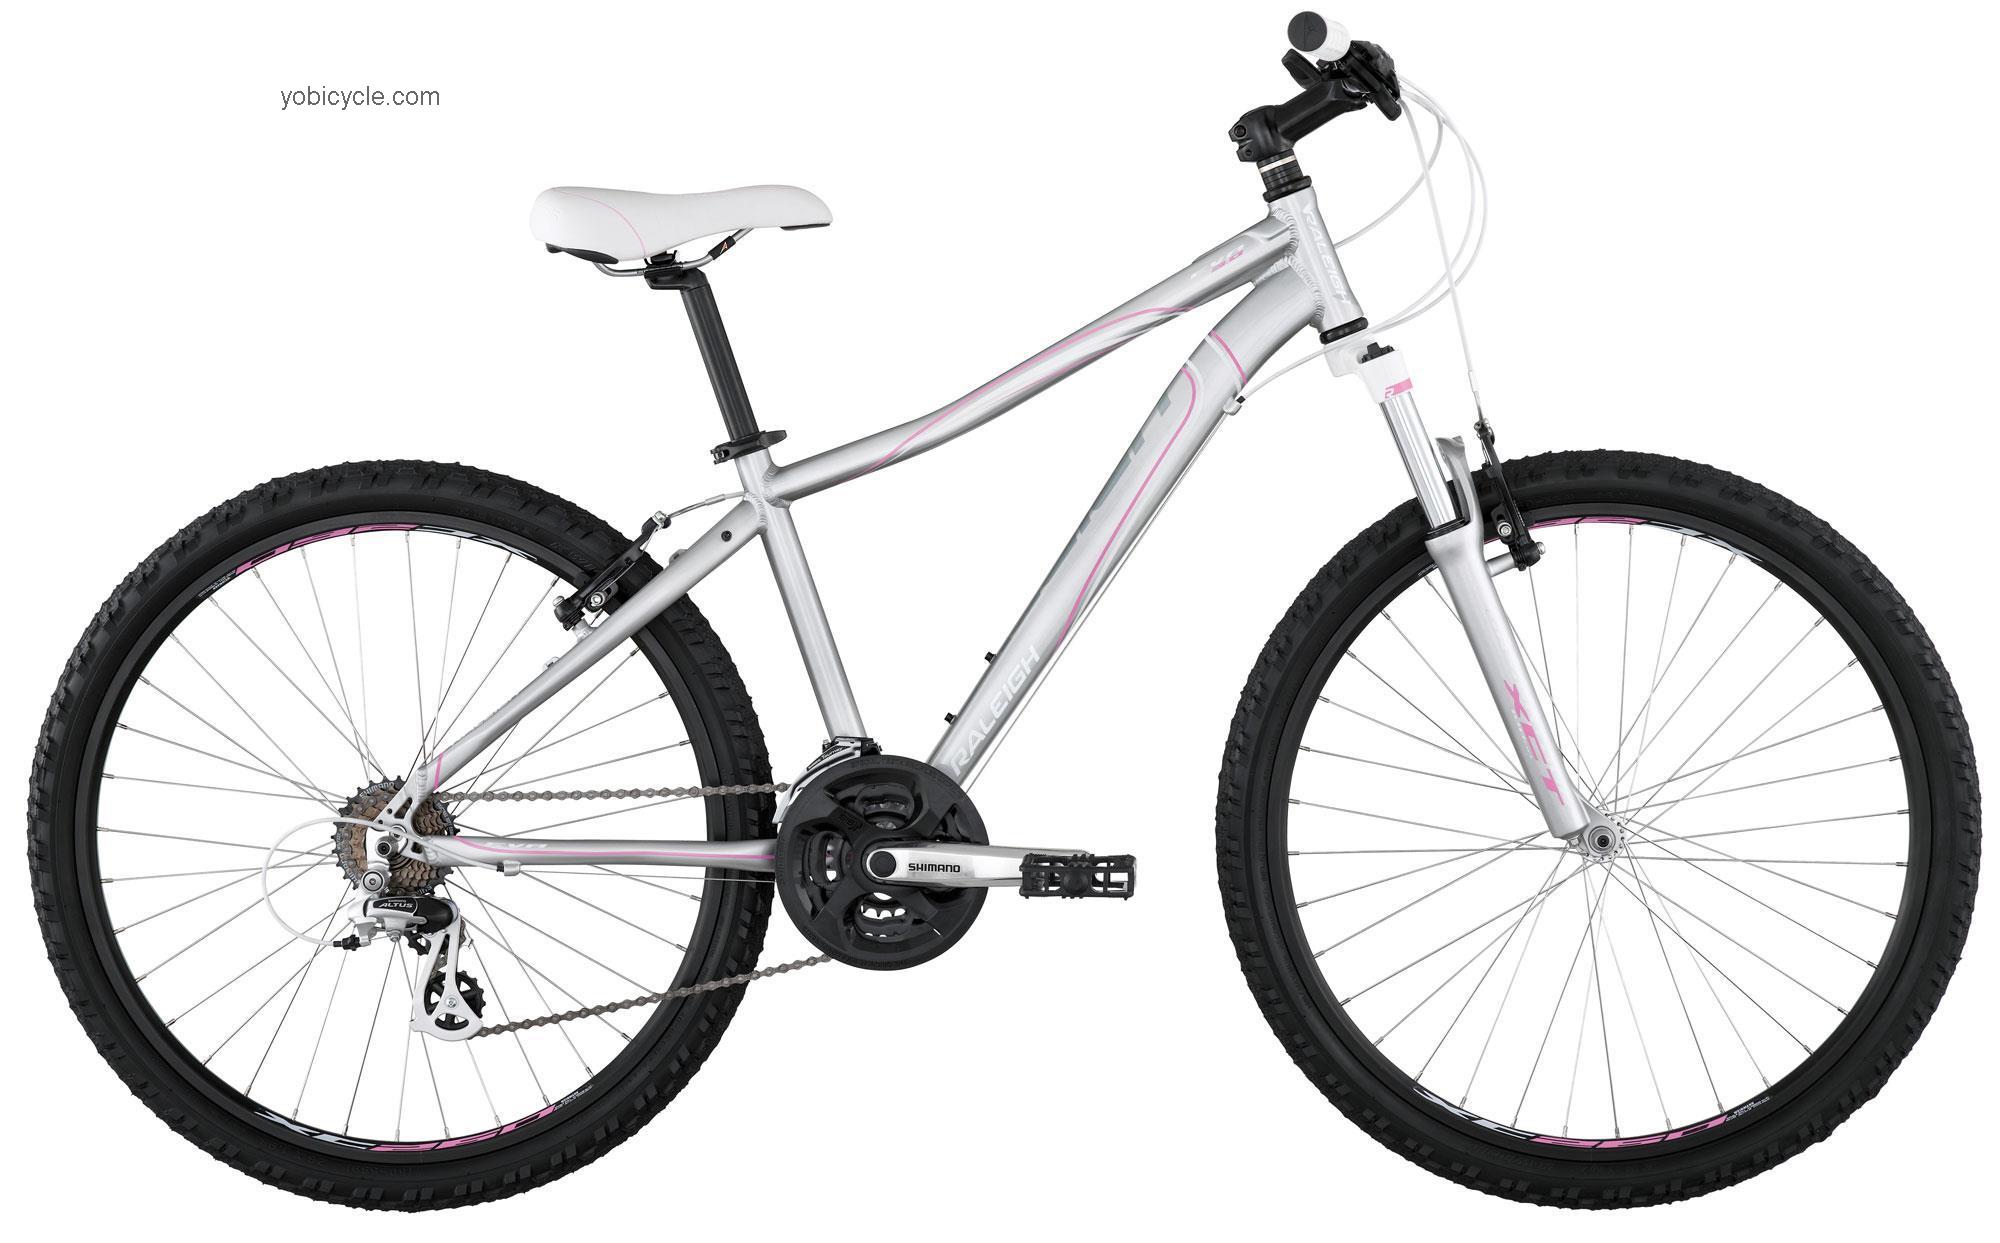 Raleigh Eva 3.0 2012 comparison online with competitors